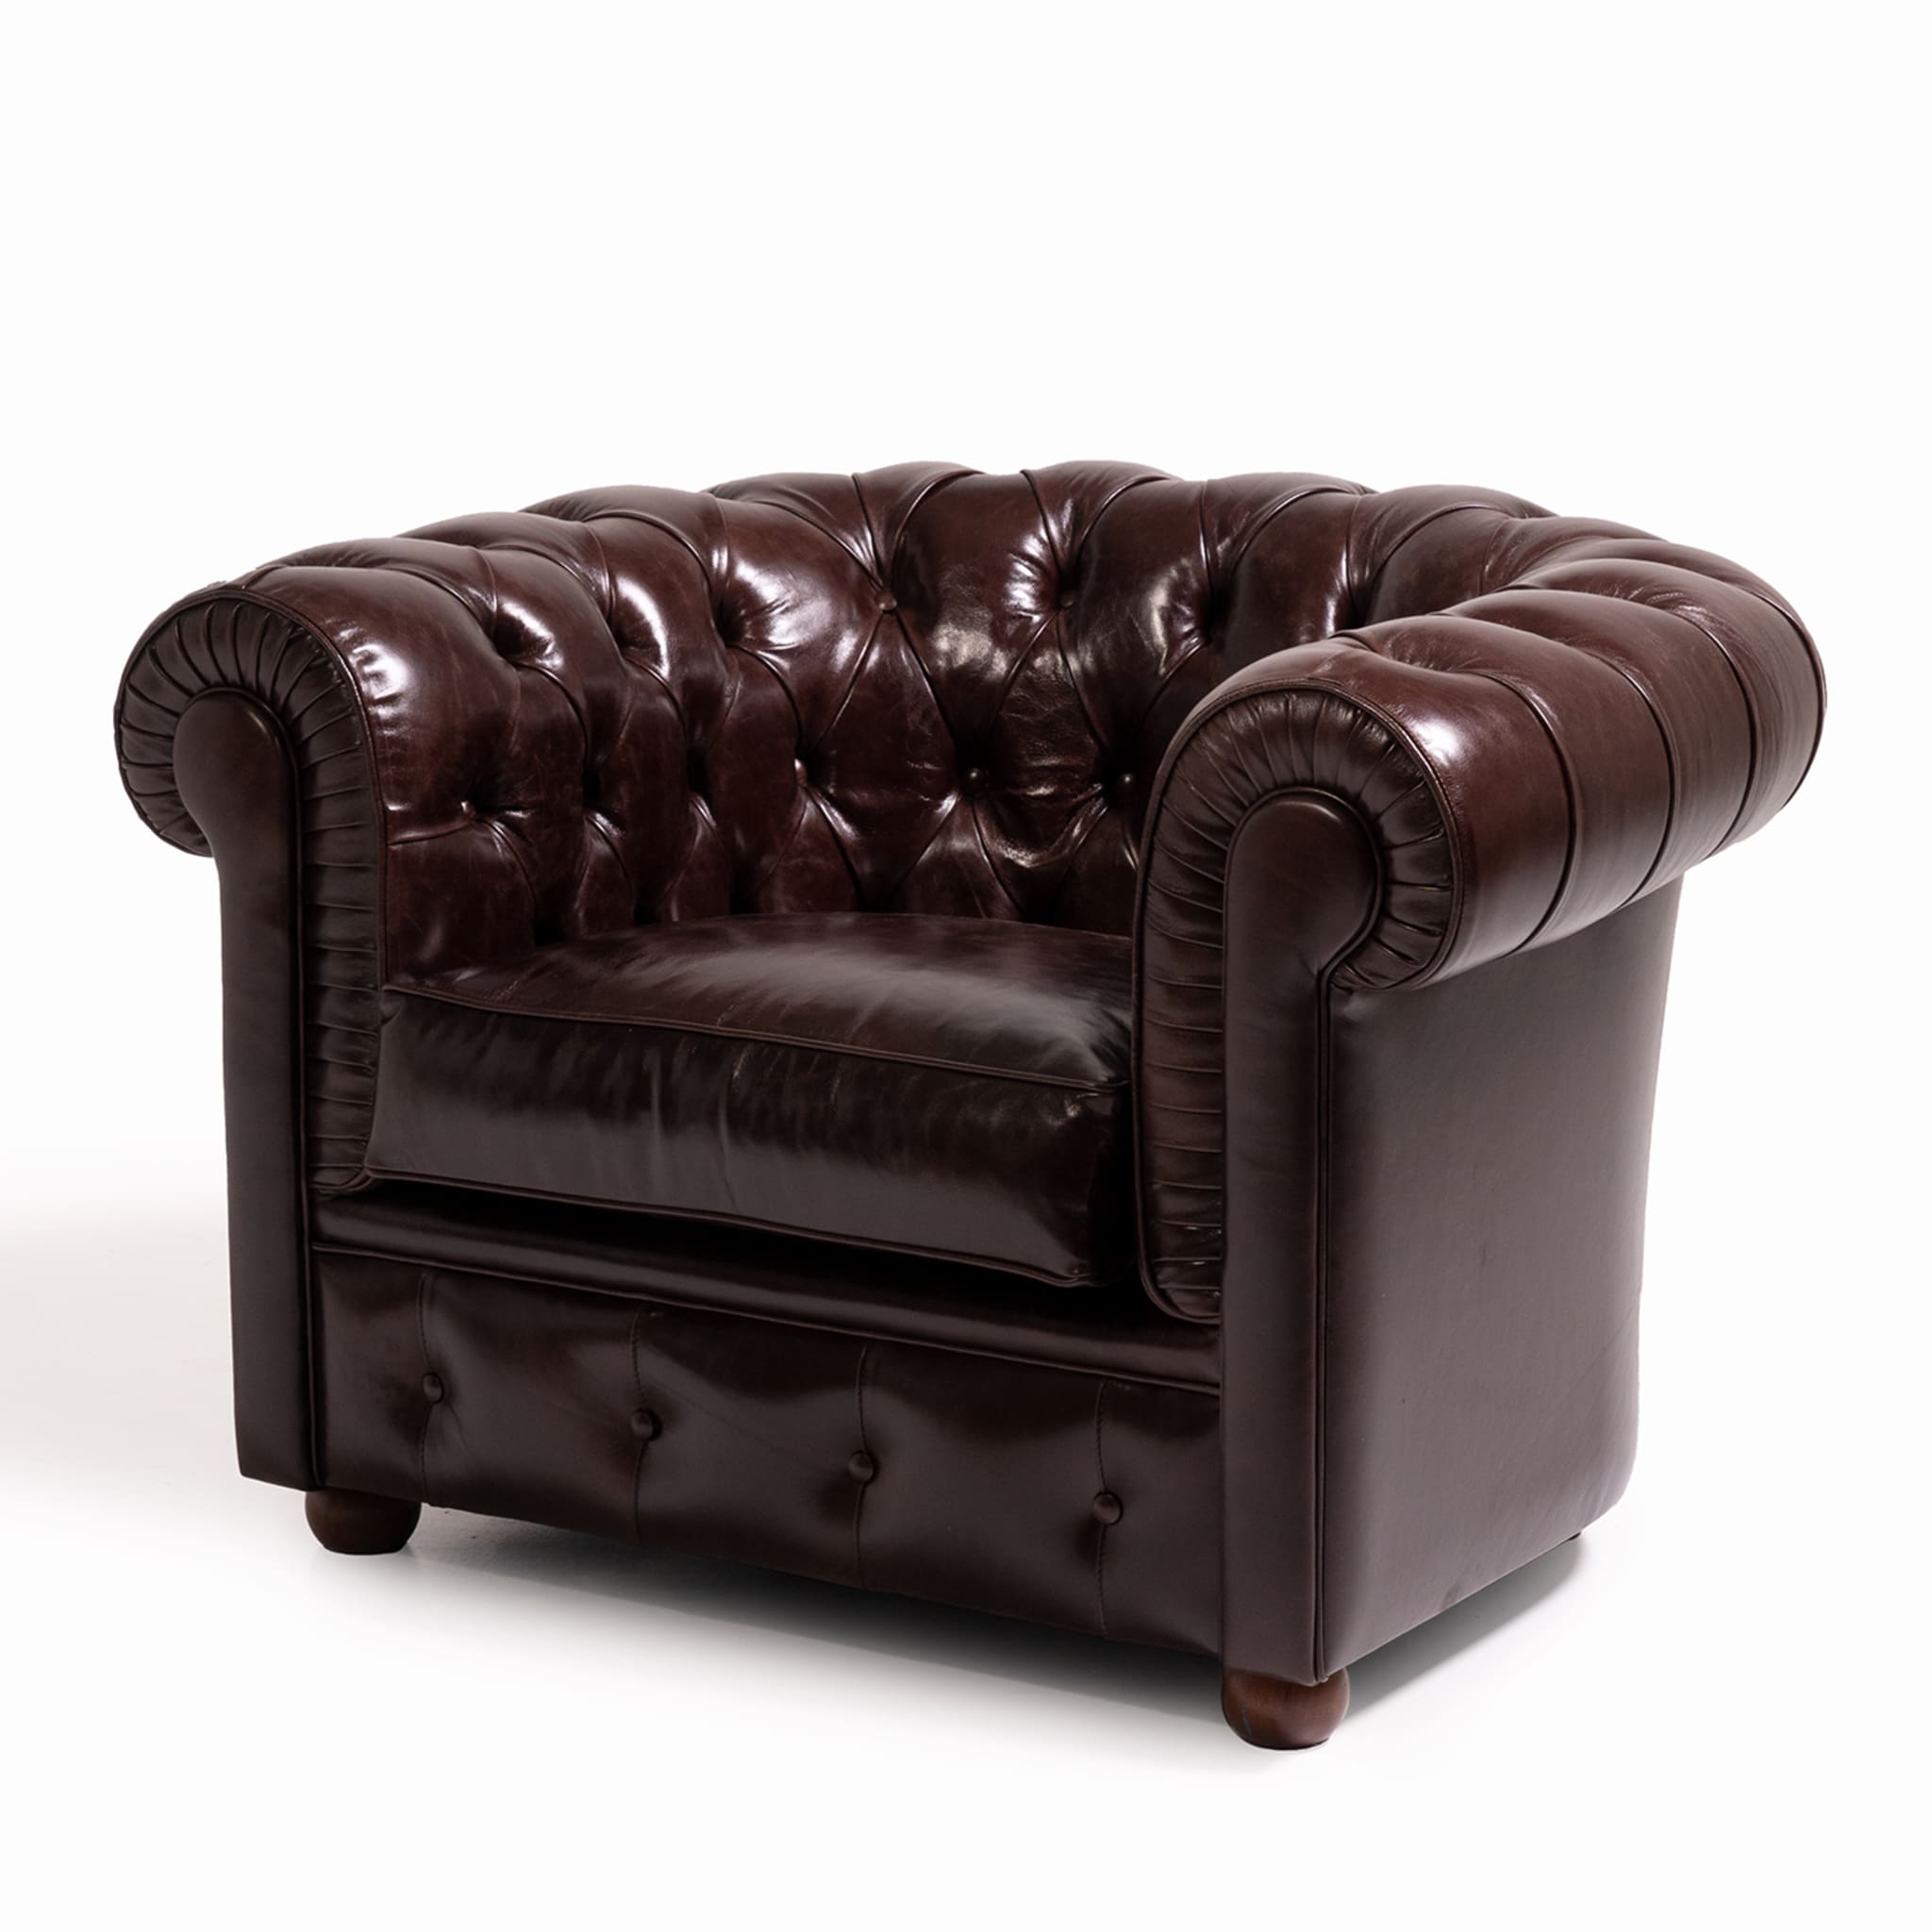 Chesterfield Brown Leather Armchair - Alternative view 1